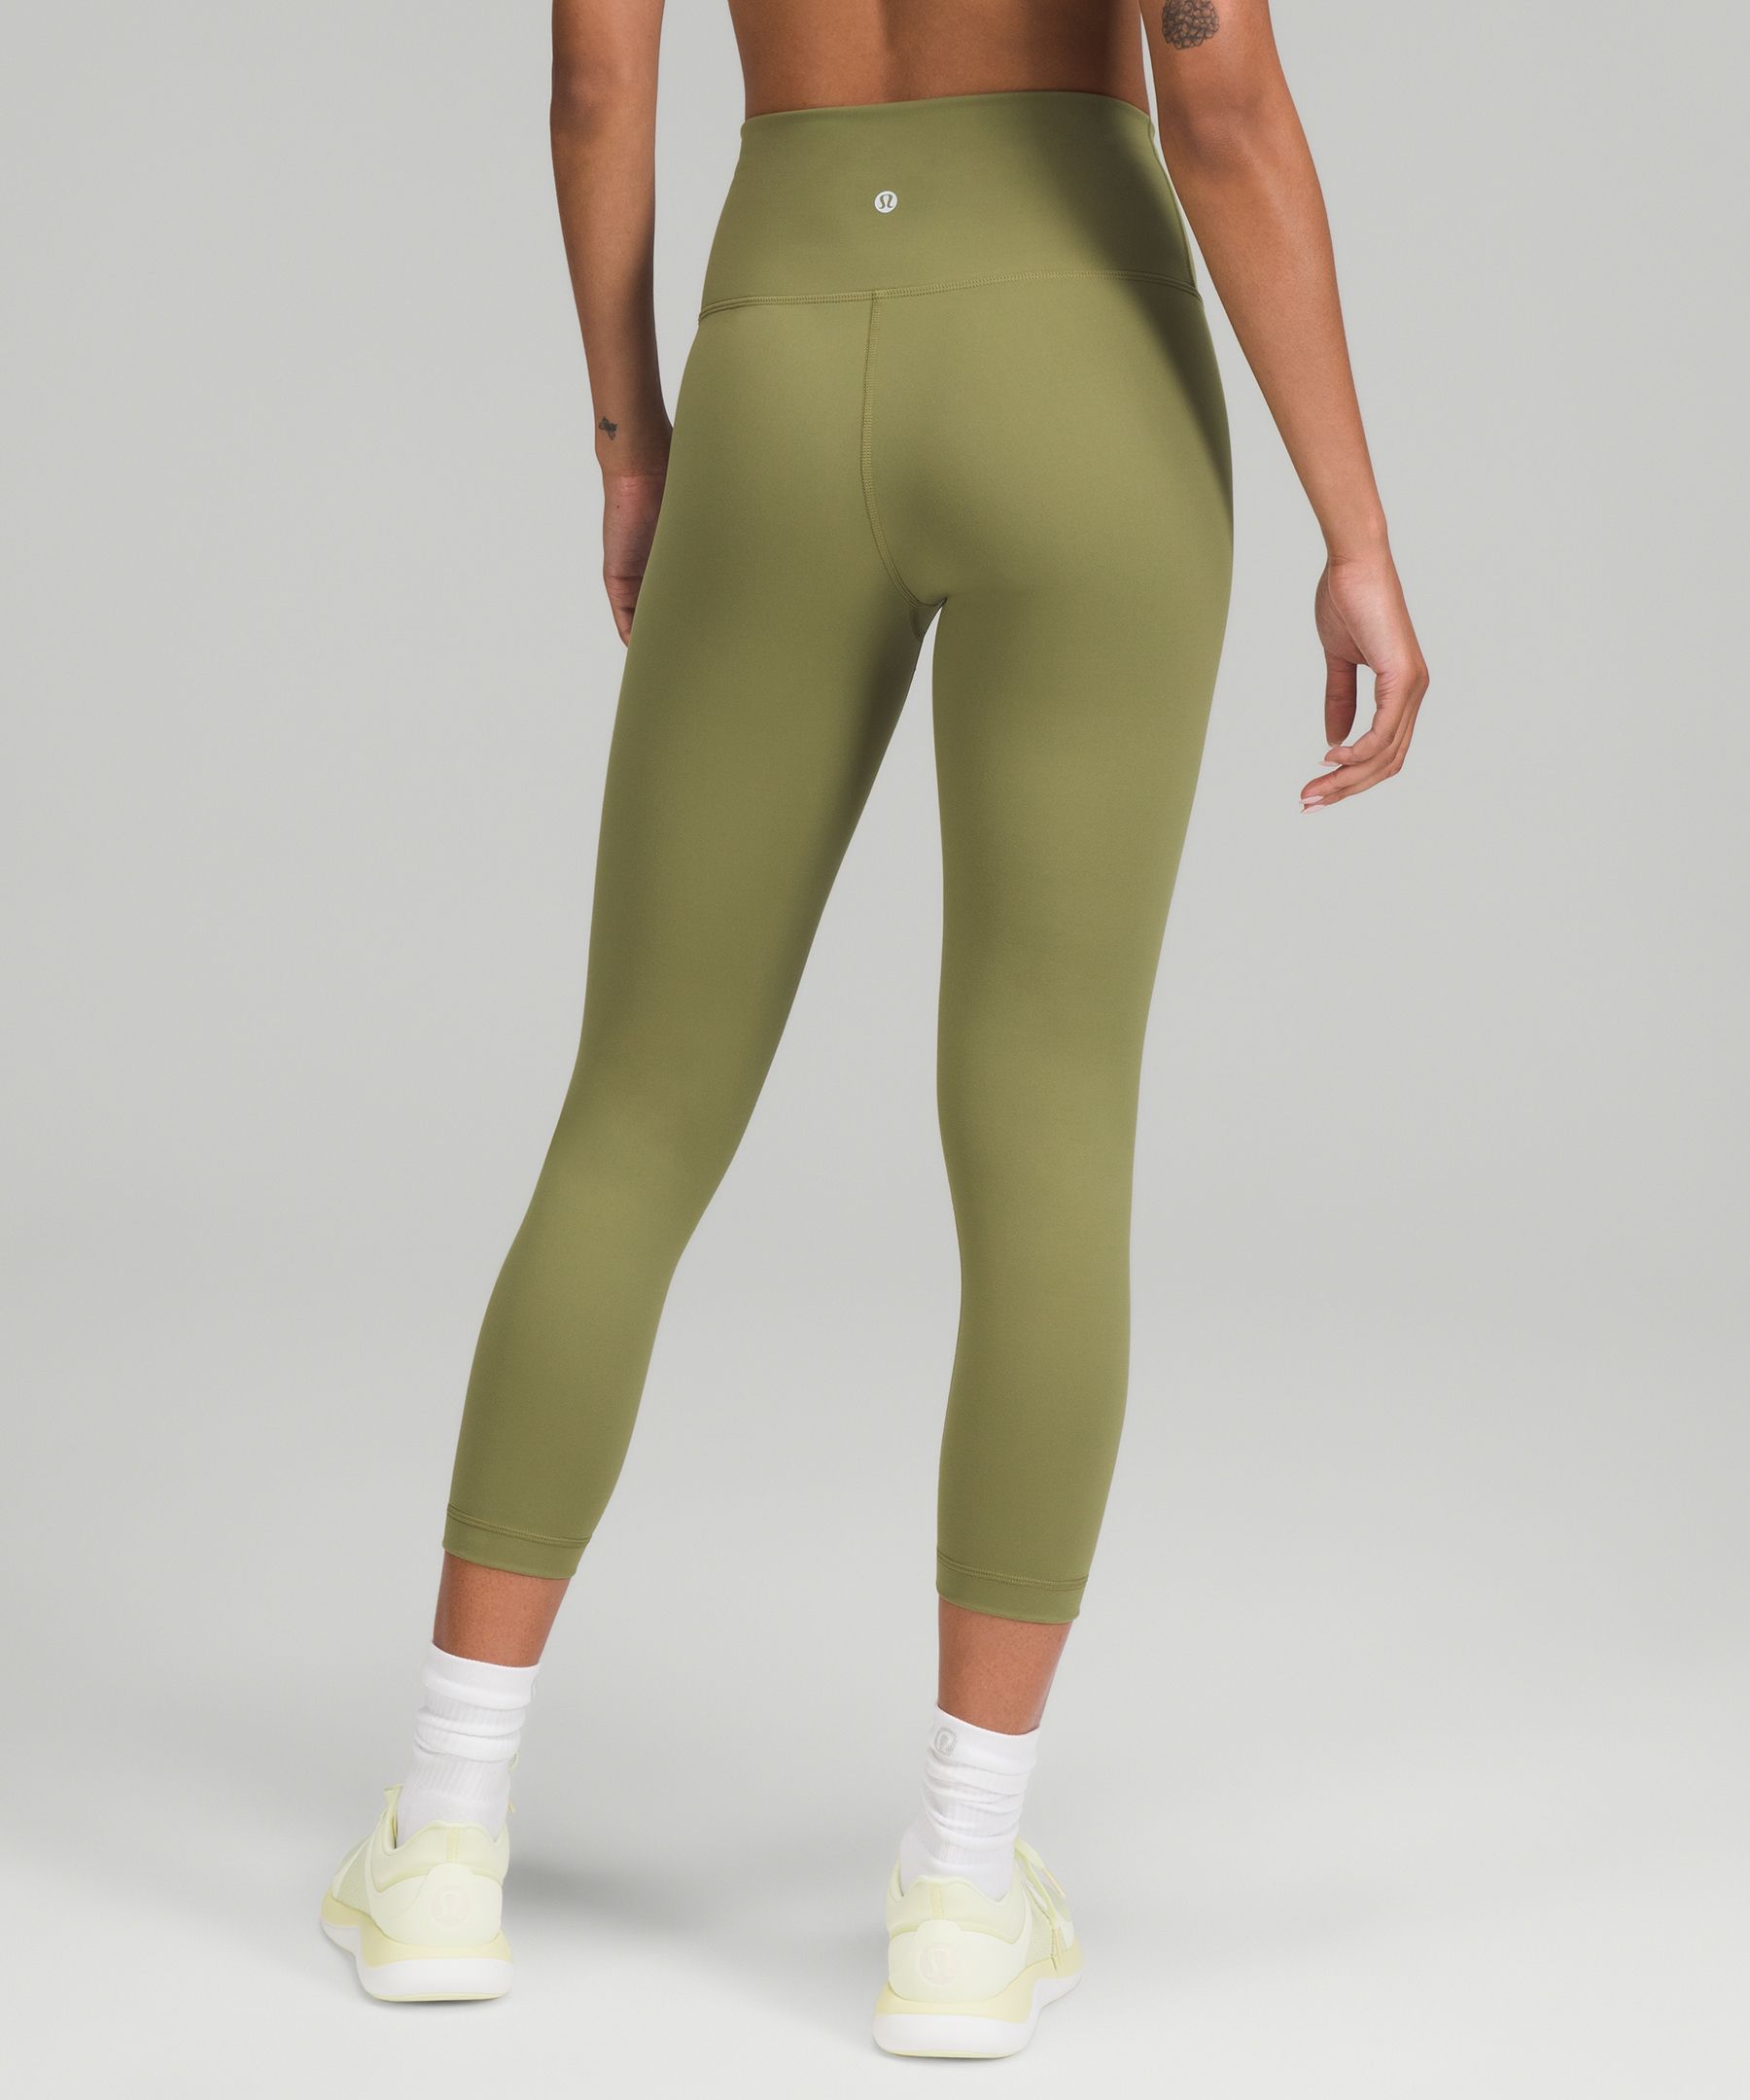 Lululemon Wunder Under Capoeira Multi Color Leggings High Waisted Size 4 -  $52 (59% Off Retail) - From Marissa